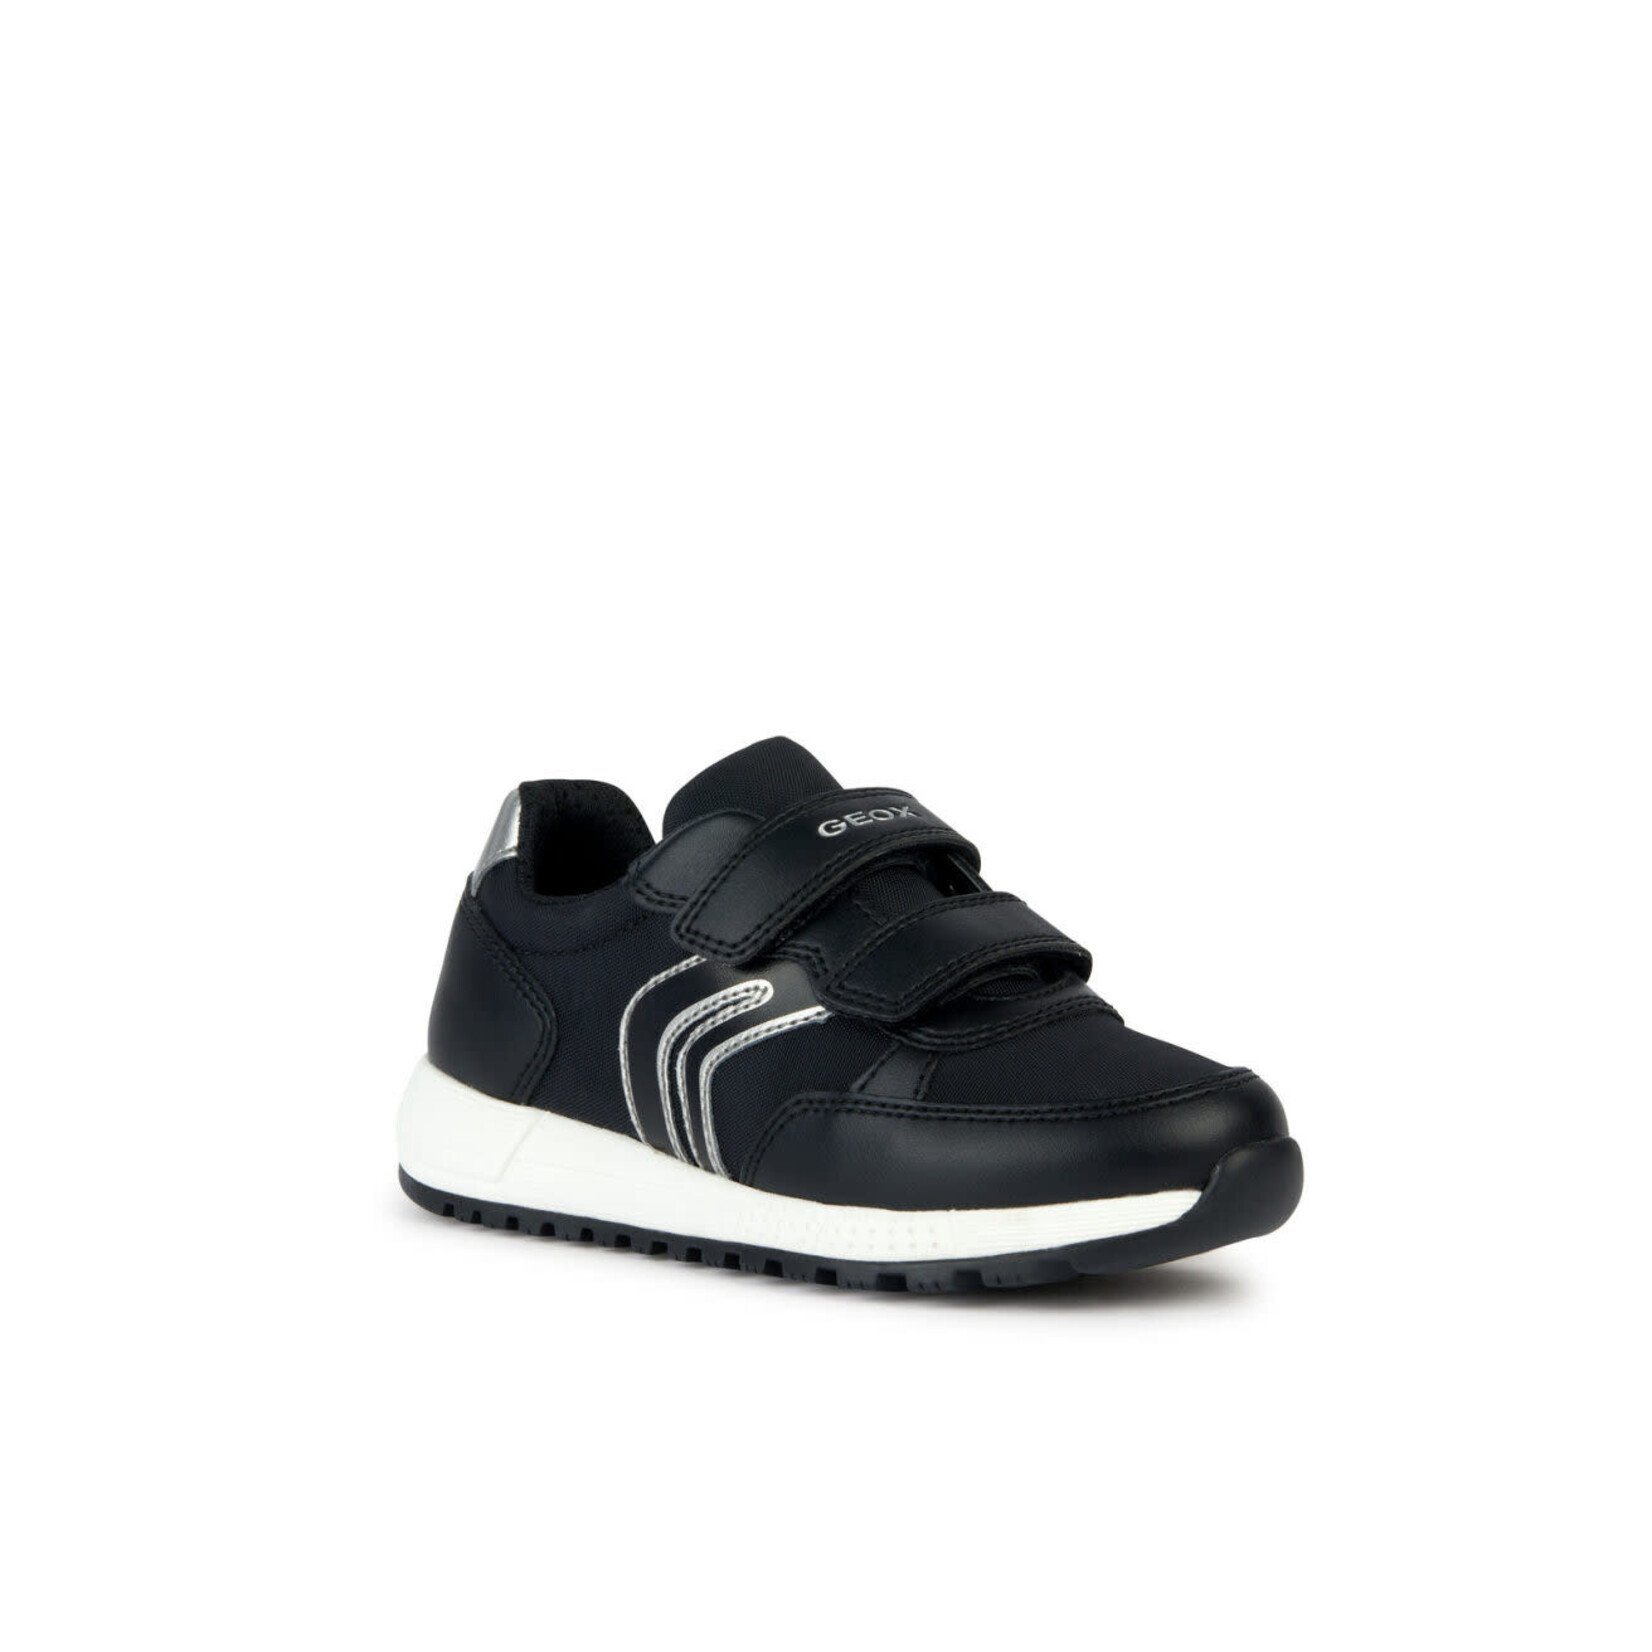 Geox GEOX -  Running shoes 'G. Alben - Synt leather and textile' - Black/Dark Silver